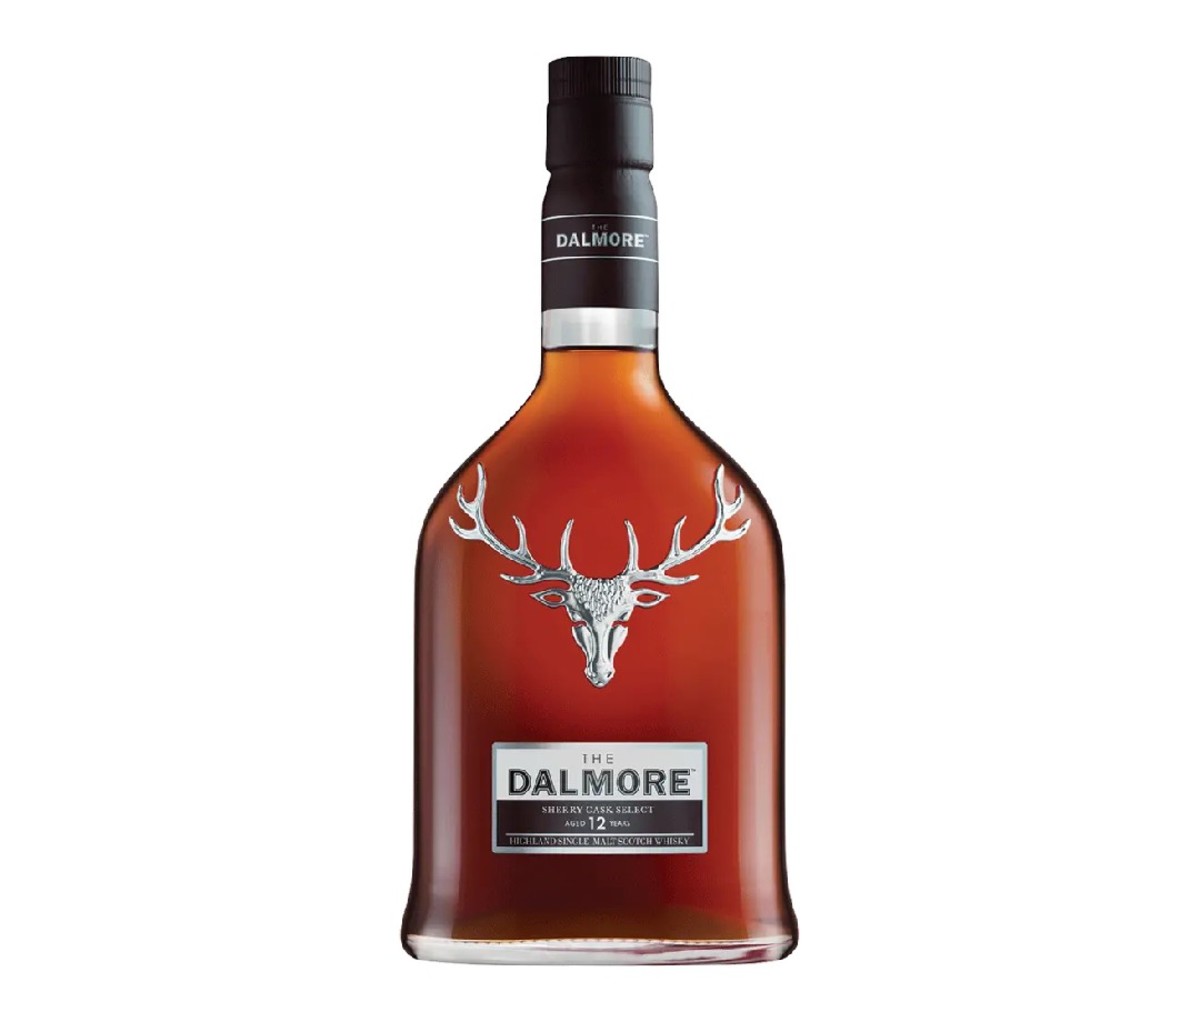 A bottle of The Dalmore 12 Year Sherry Cask Select scotch whisky.